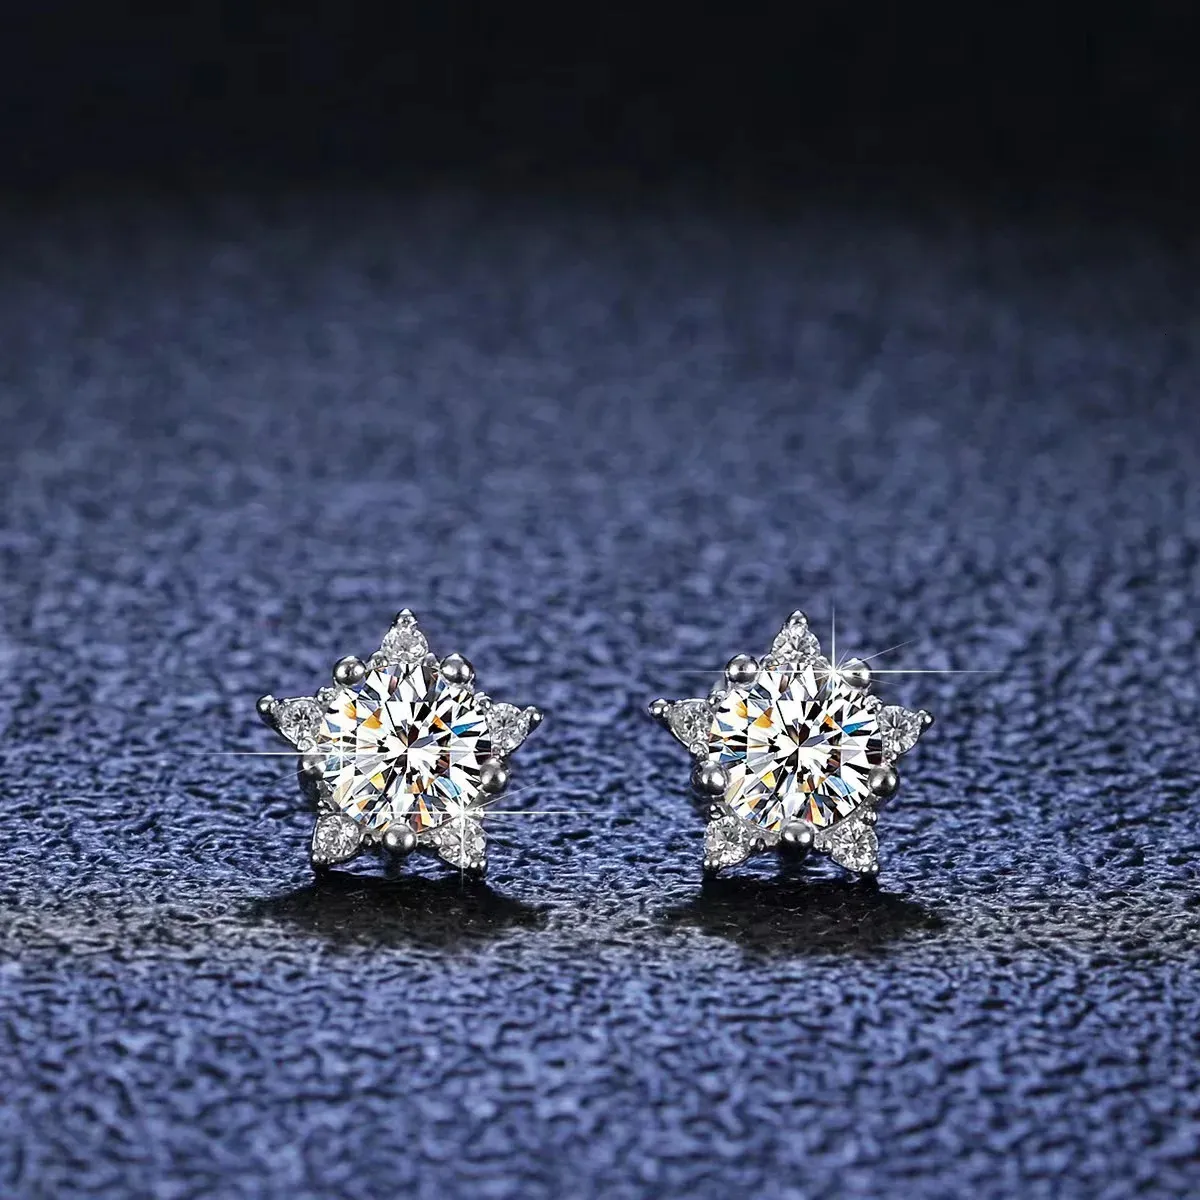 Quke Real Diamond Star Stud earrings 05ct D Color VVS1 Pure 925 Sterling Silver for Womende